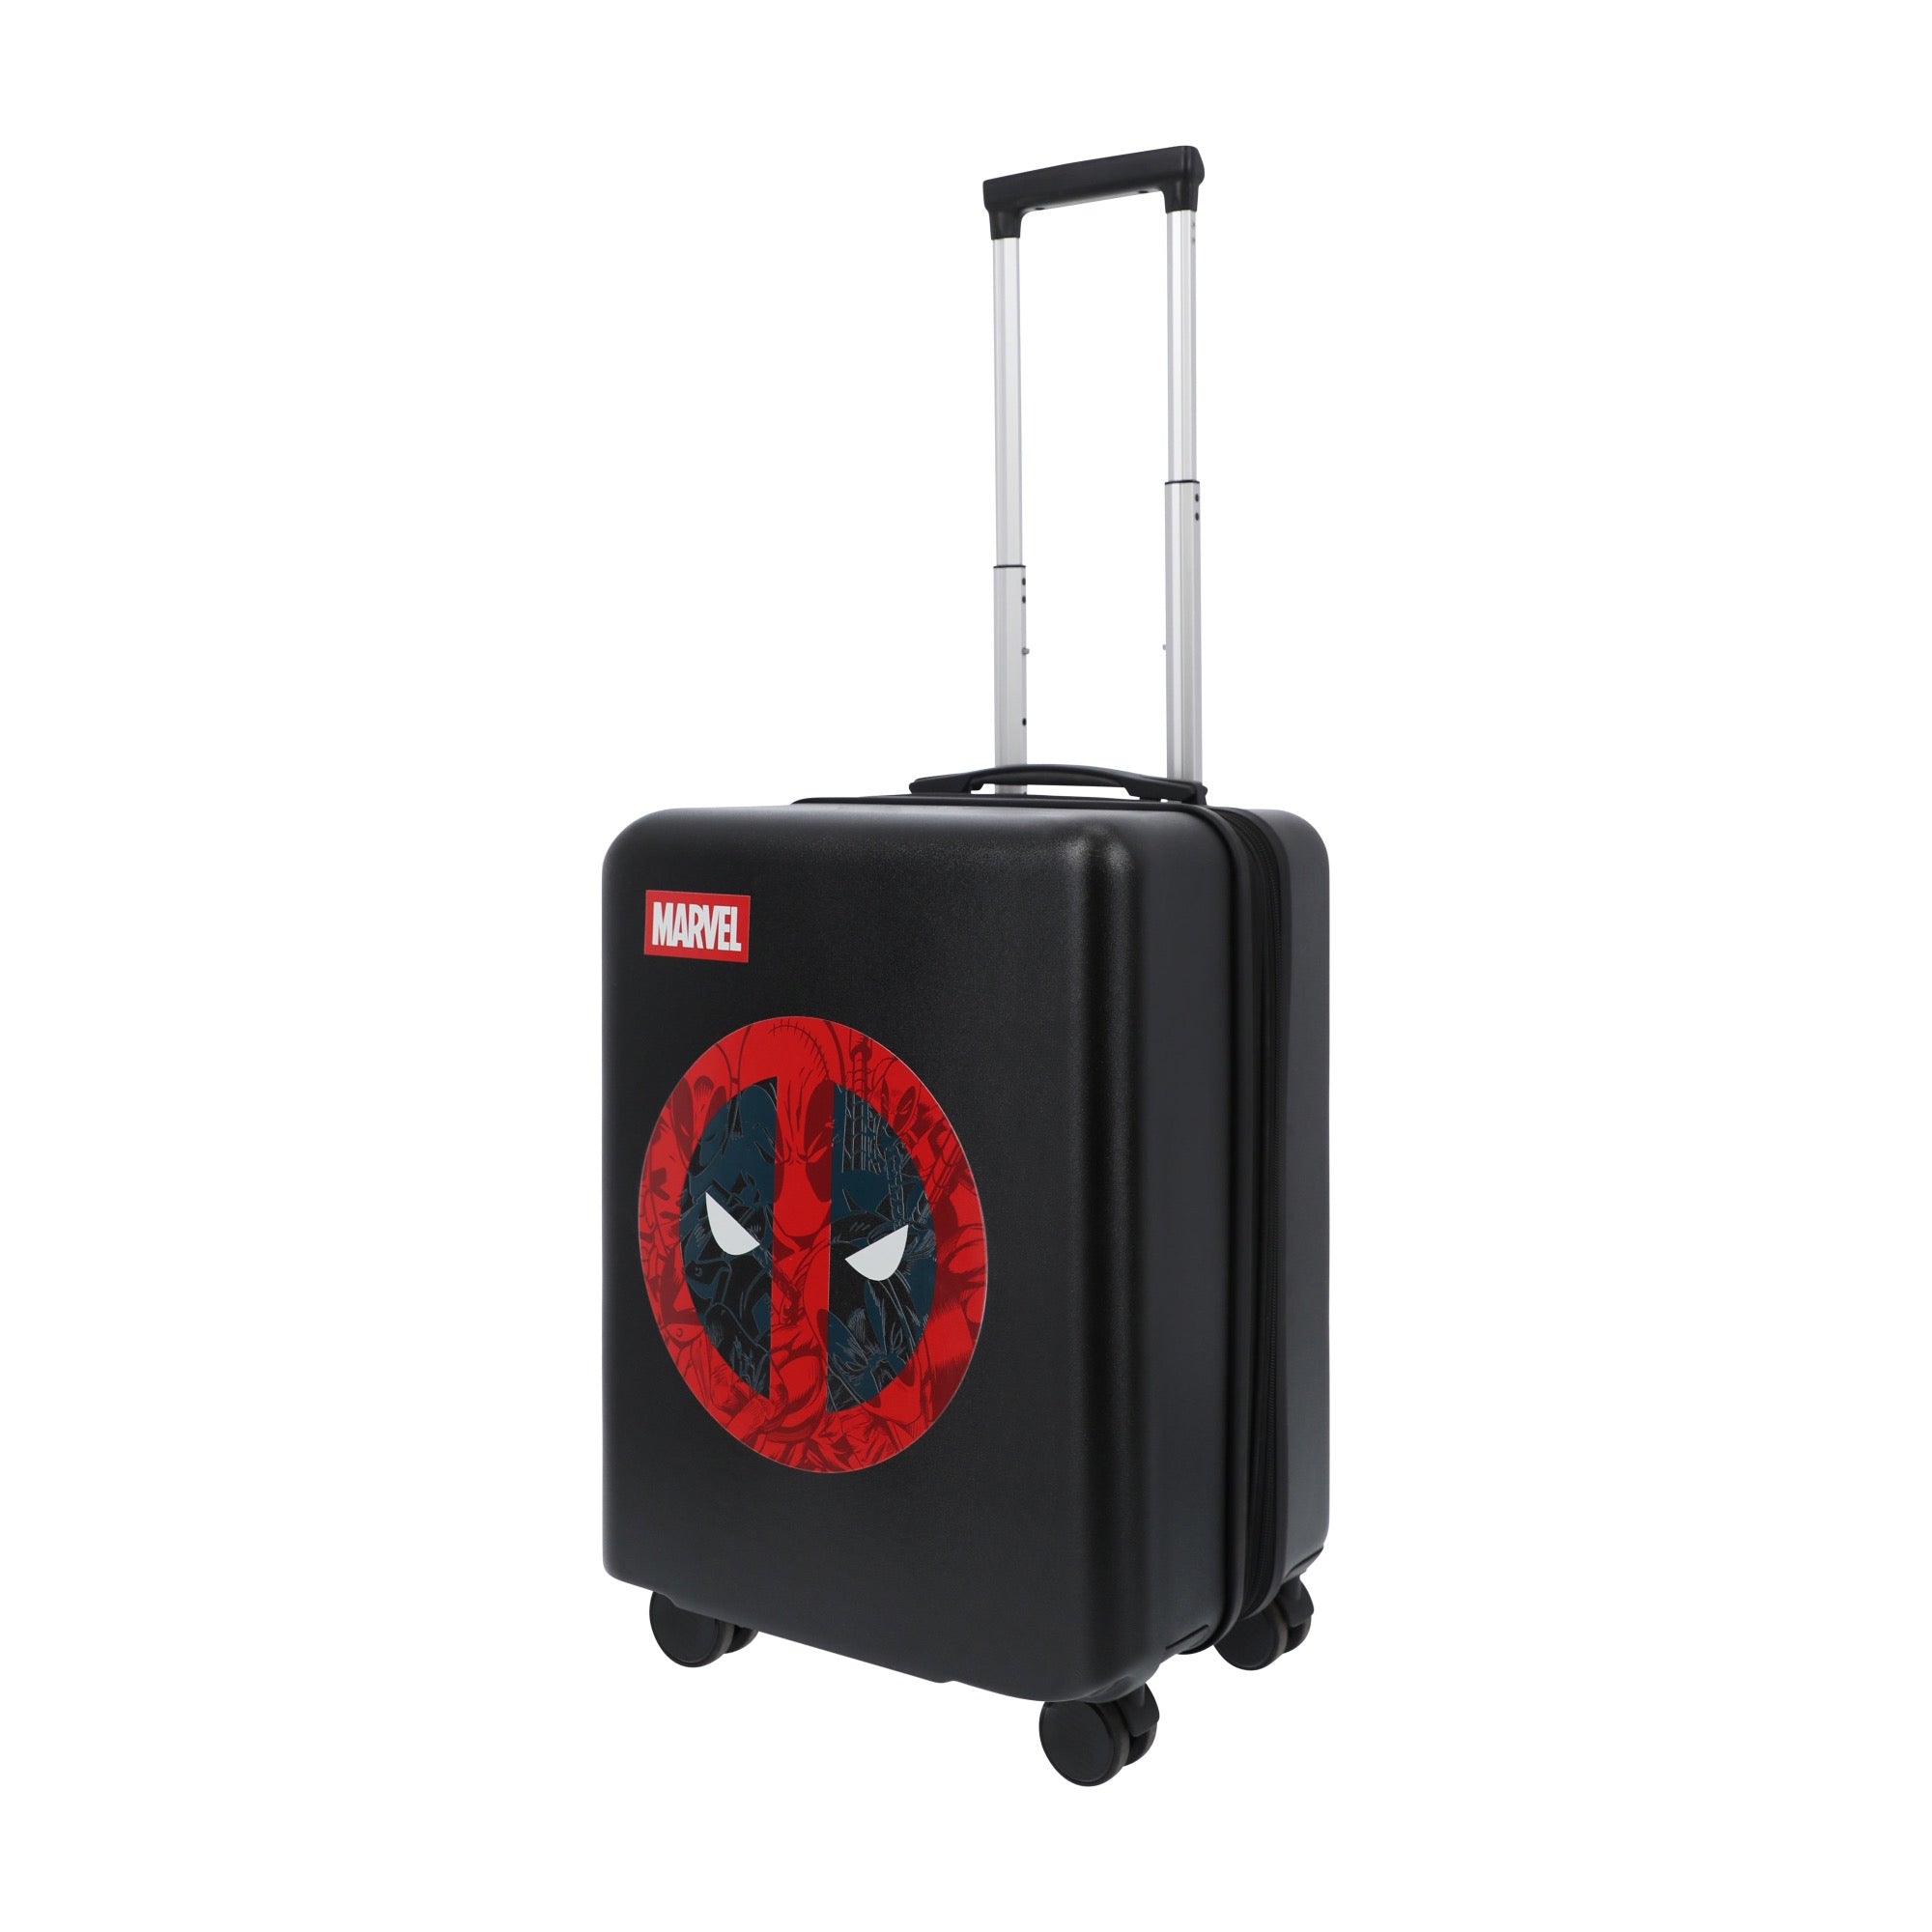 Black marvel deadpool 22.5" carry-on spinner suitcase luggage by Ful